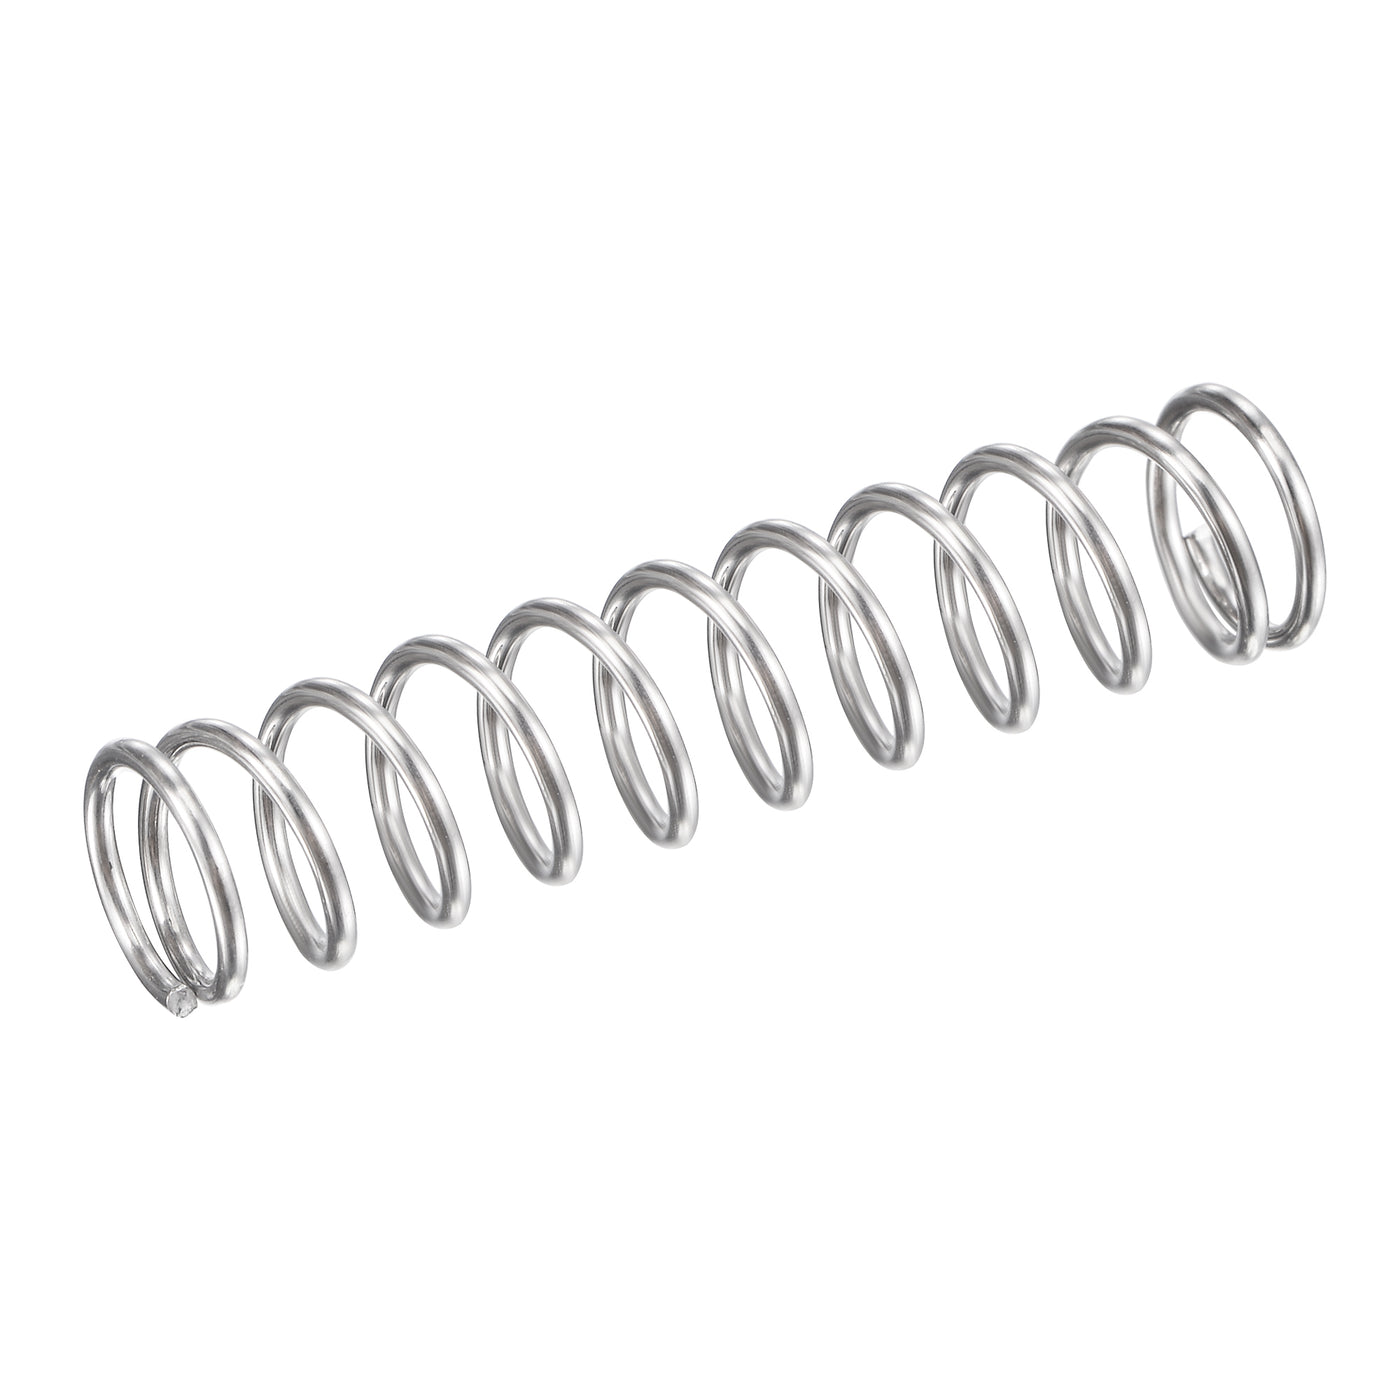 uxcell Uxcell 9mmx1mmx40mm 304 Stainless Steel Compression Spring 31.4N Load Capacity 20pcs